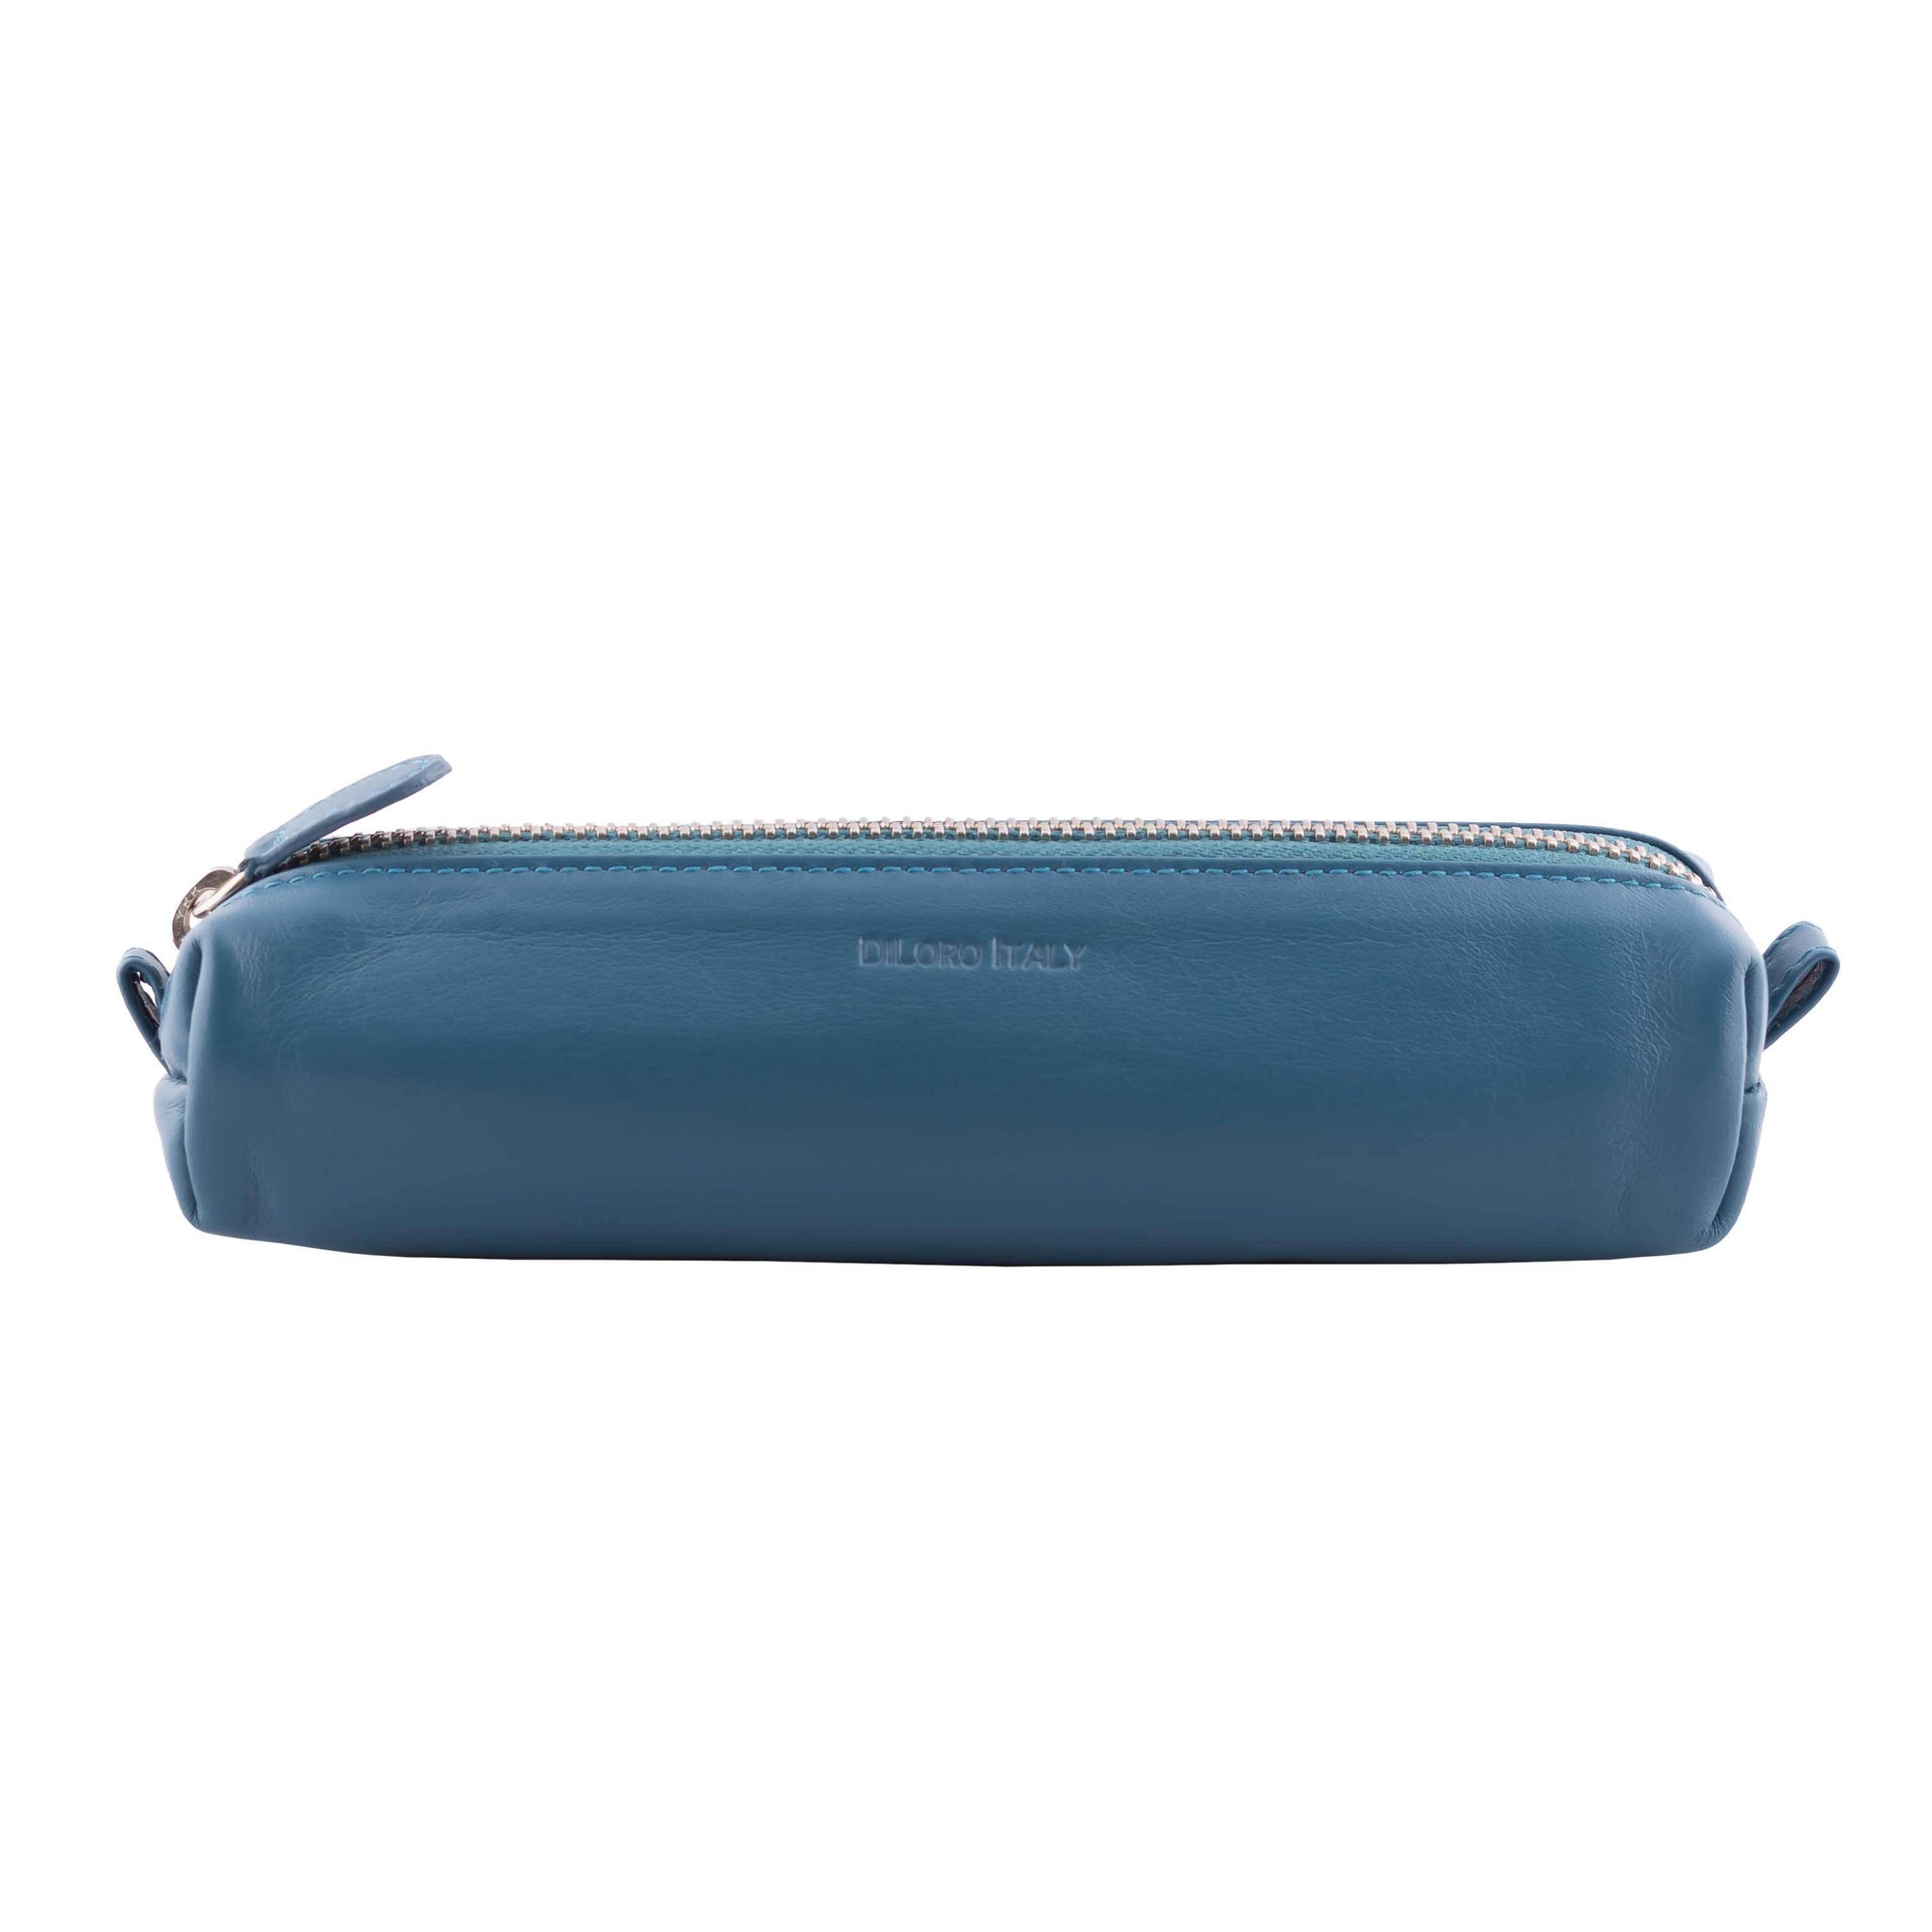 Multi-Purpose Zippered Leather Pen Pencil Case in Various Colors - Blue